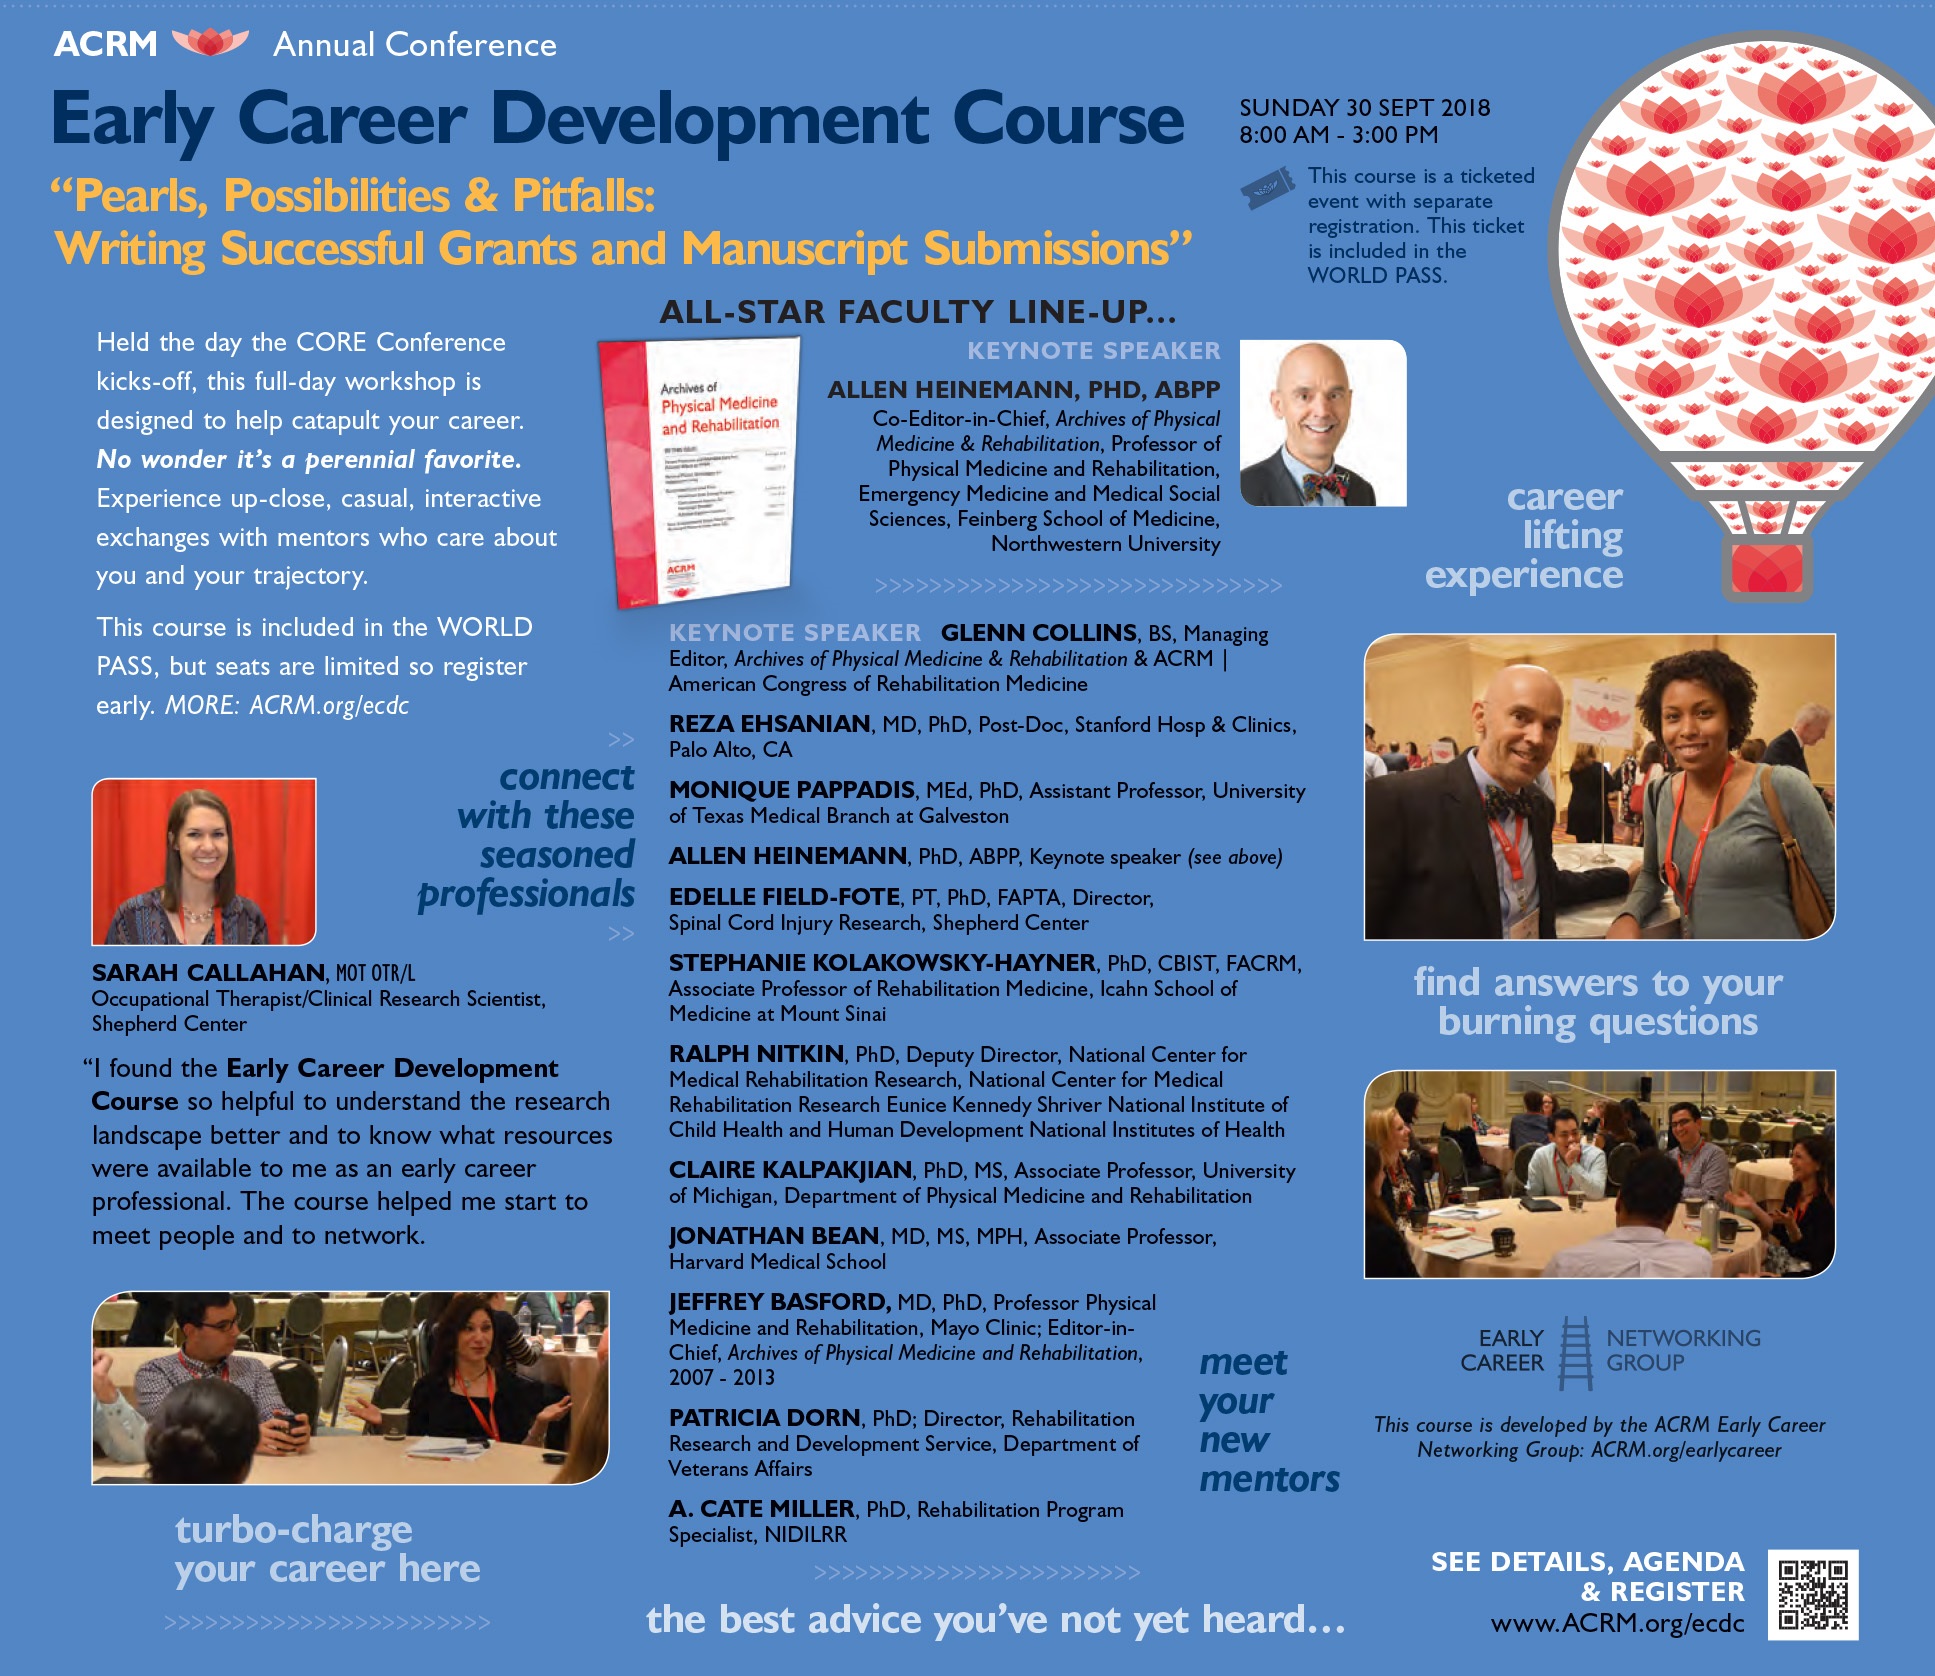 Early Career Development Course Highlights